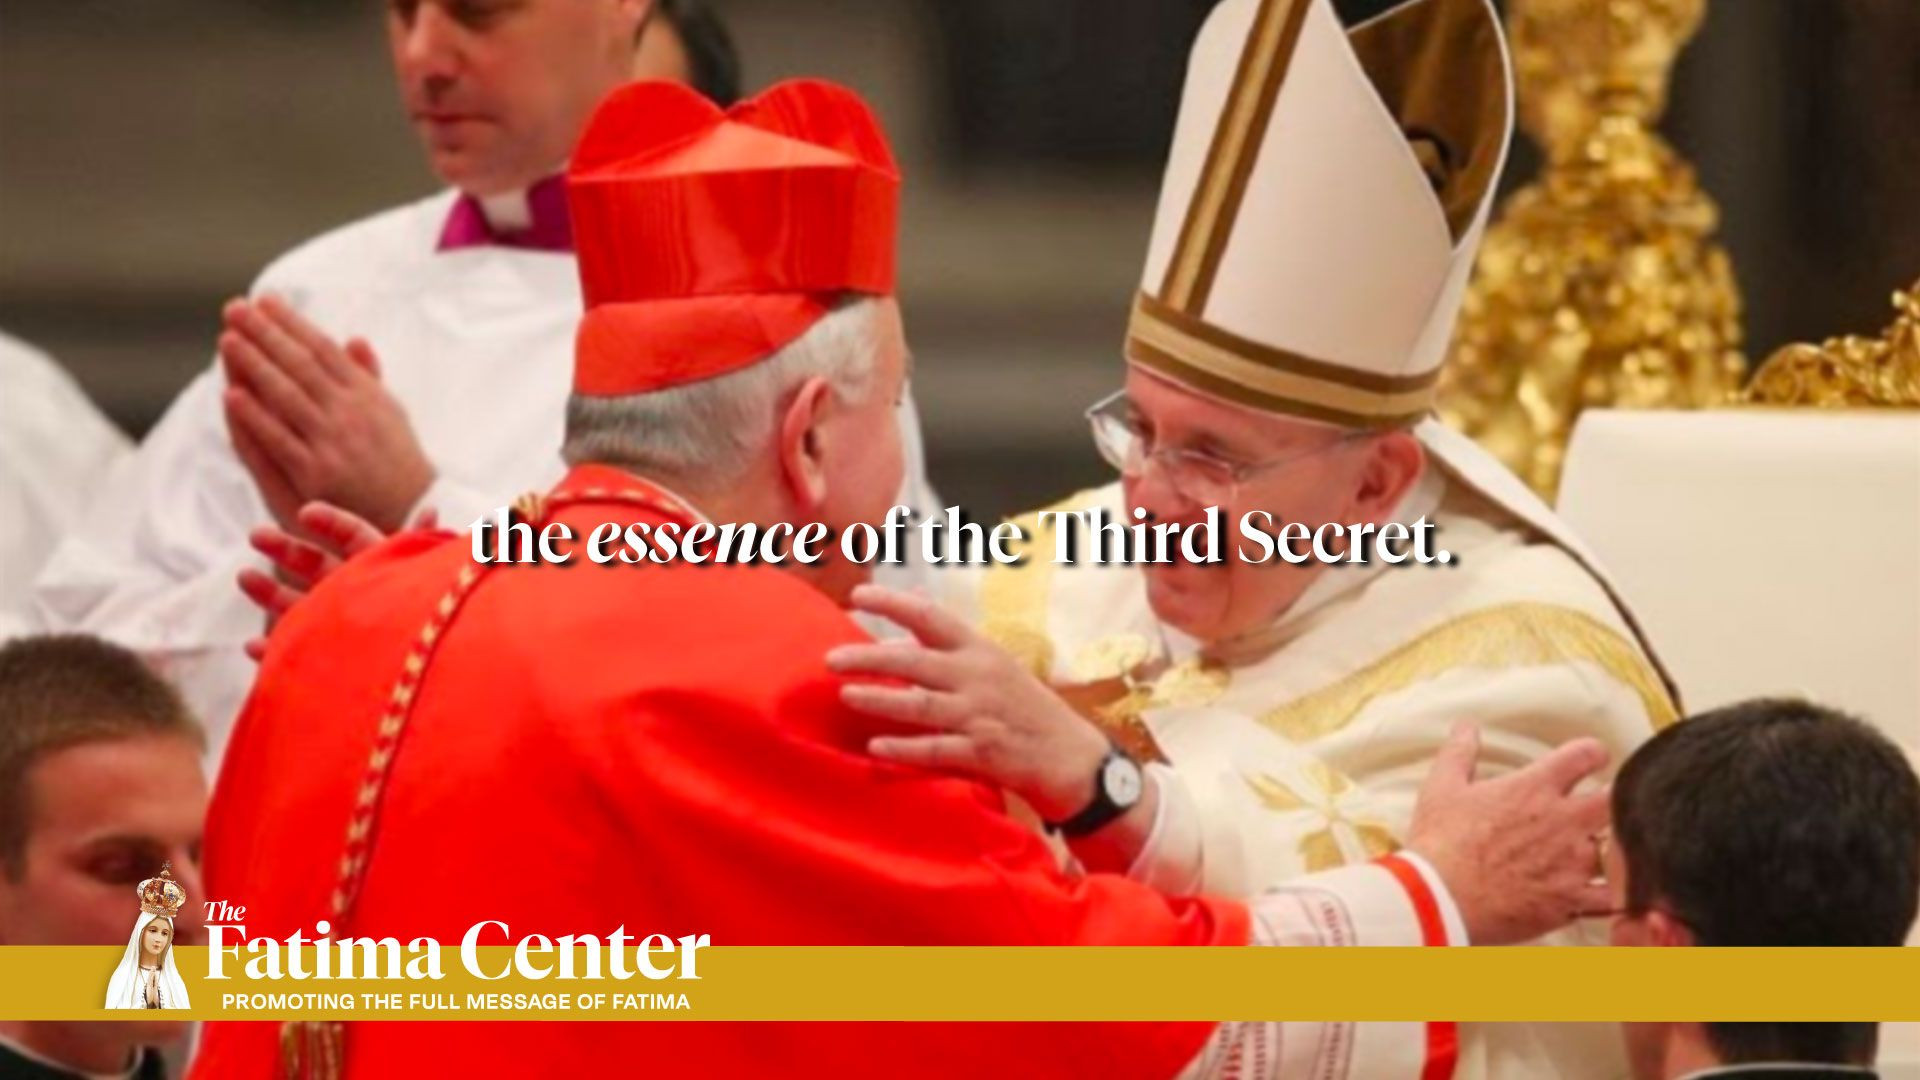 What is the *essence* of the Third Secret?